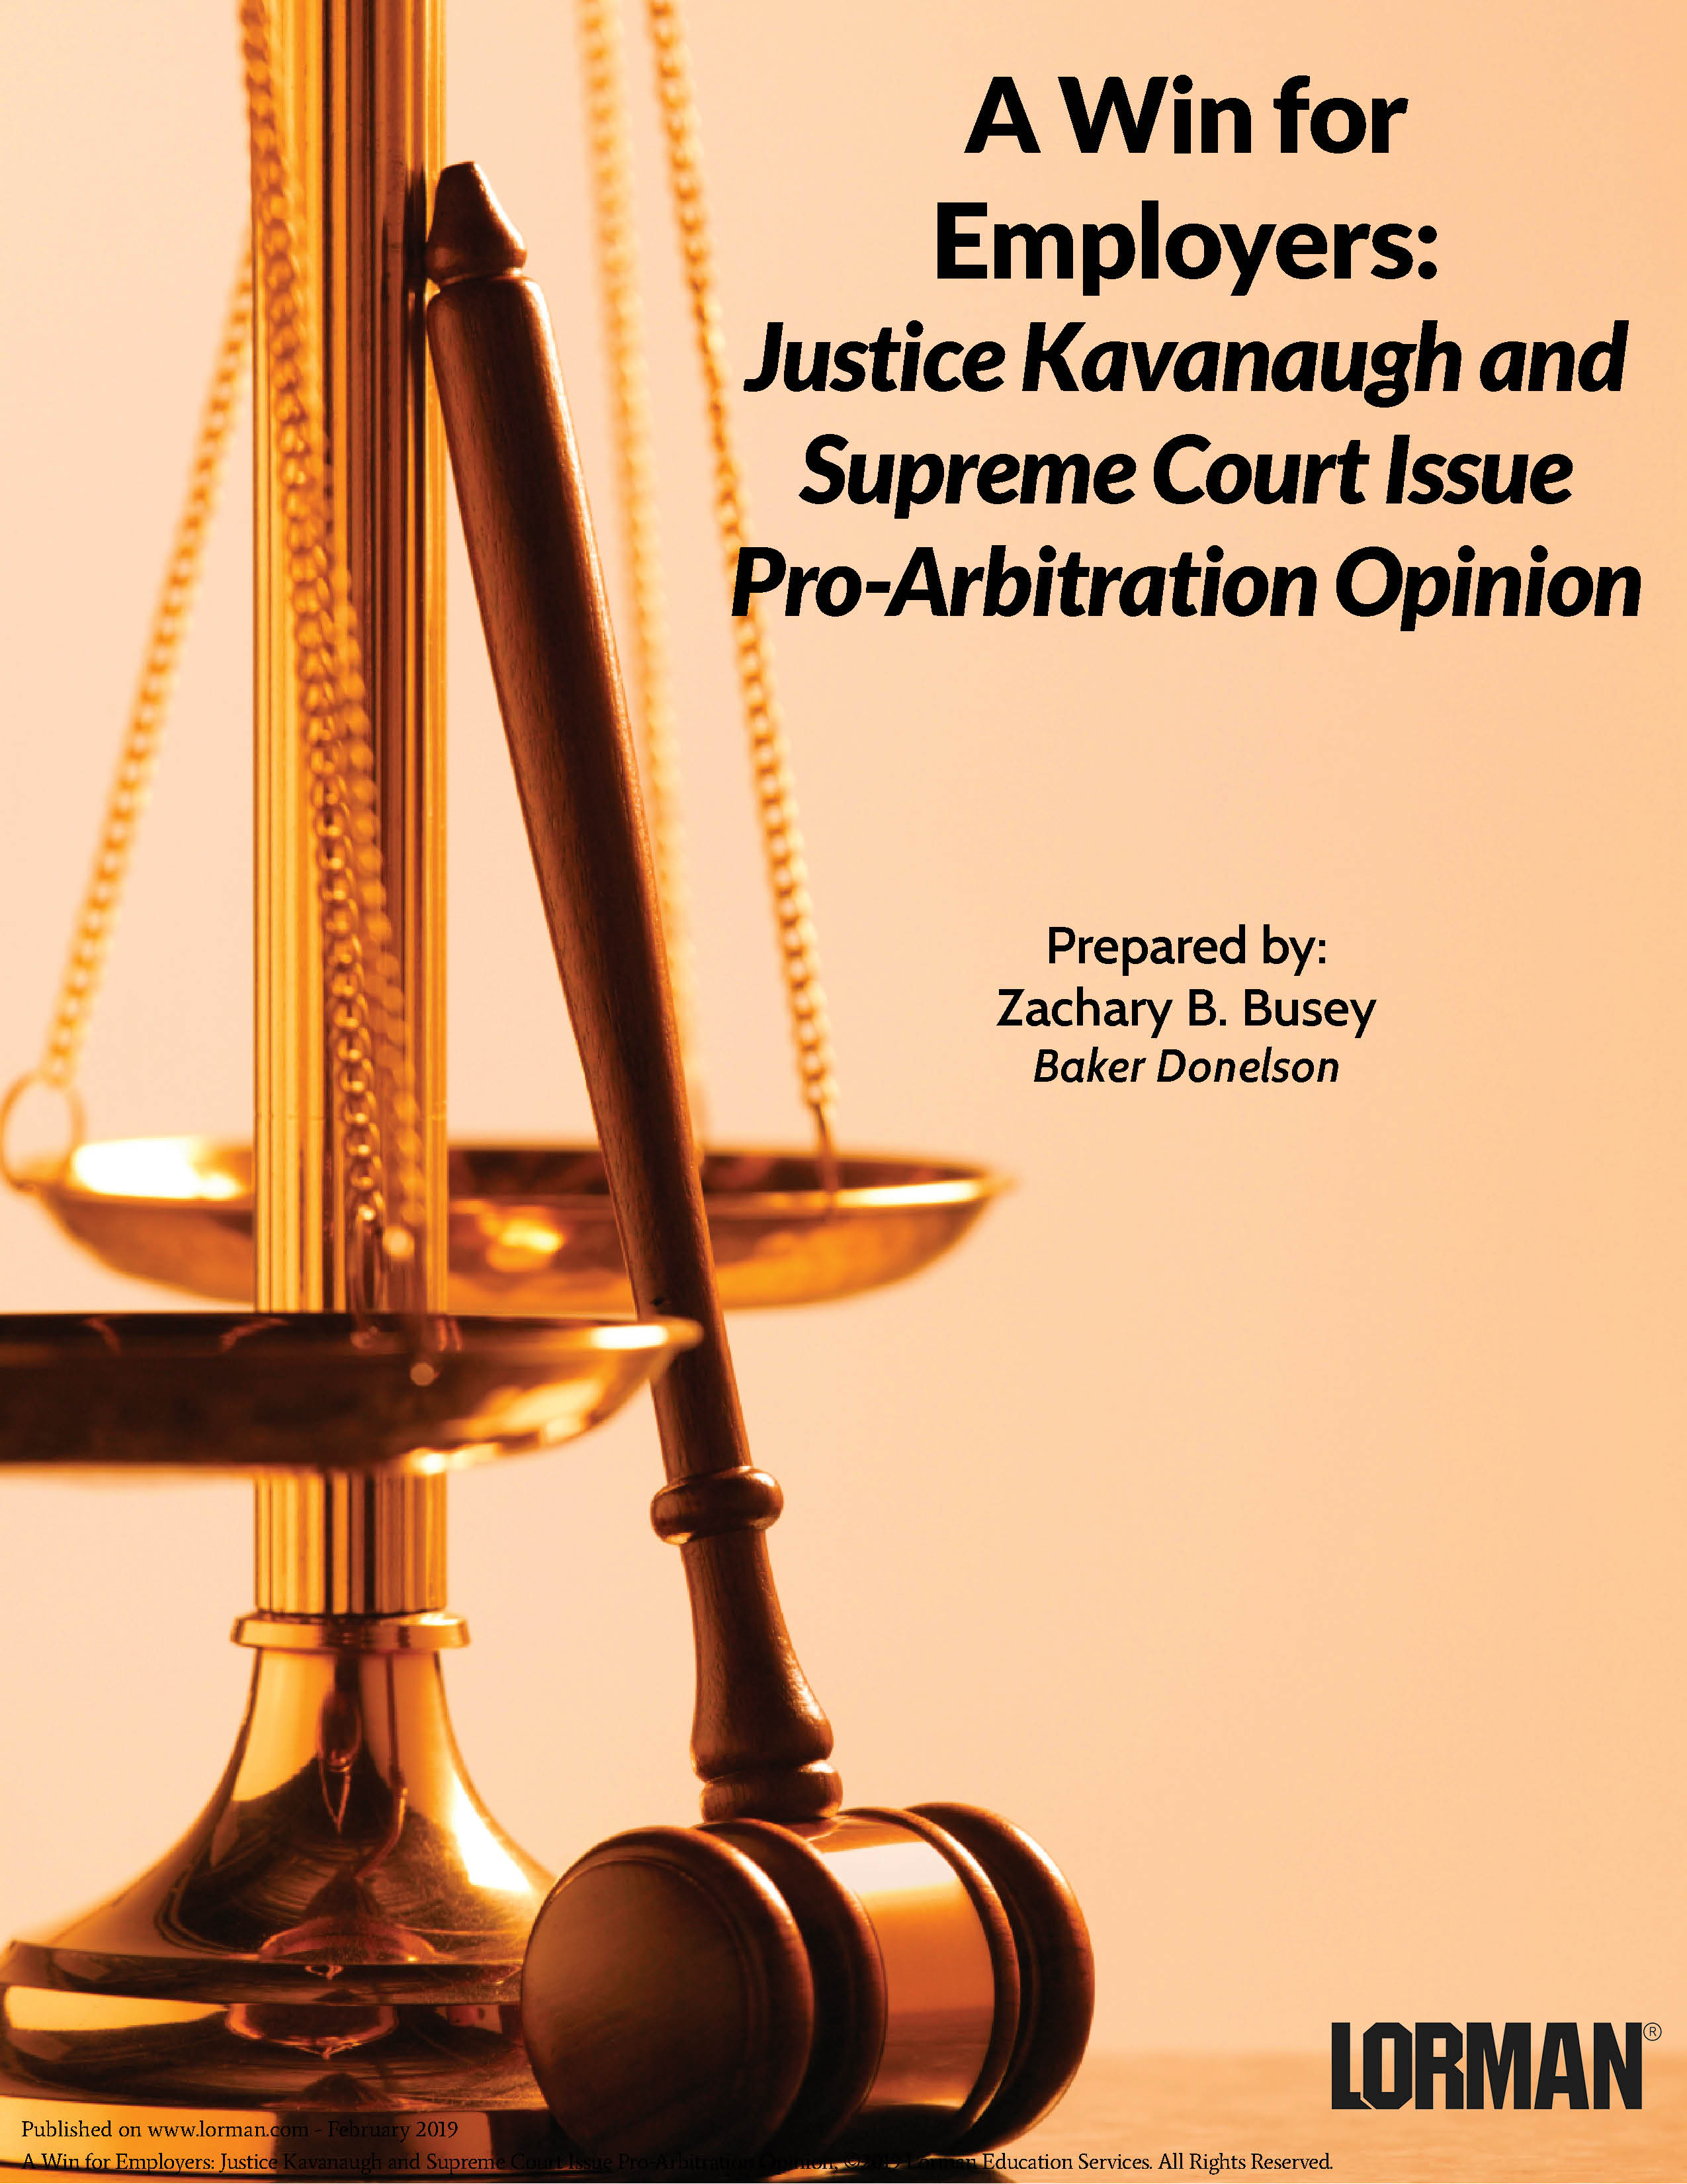 A Win for Employers: Justice Kavanaugh and Supreme Court Issue Pro-Arbitration Opinion